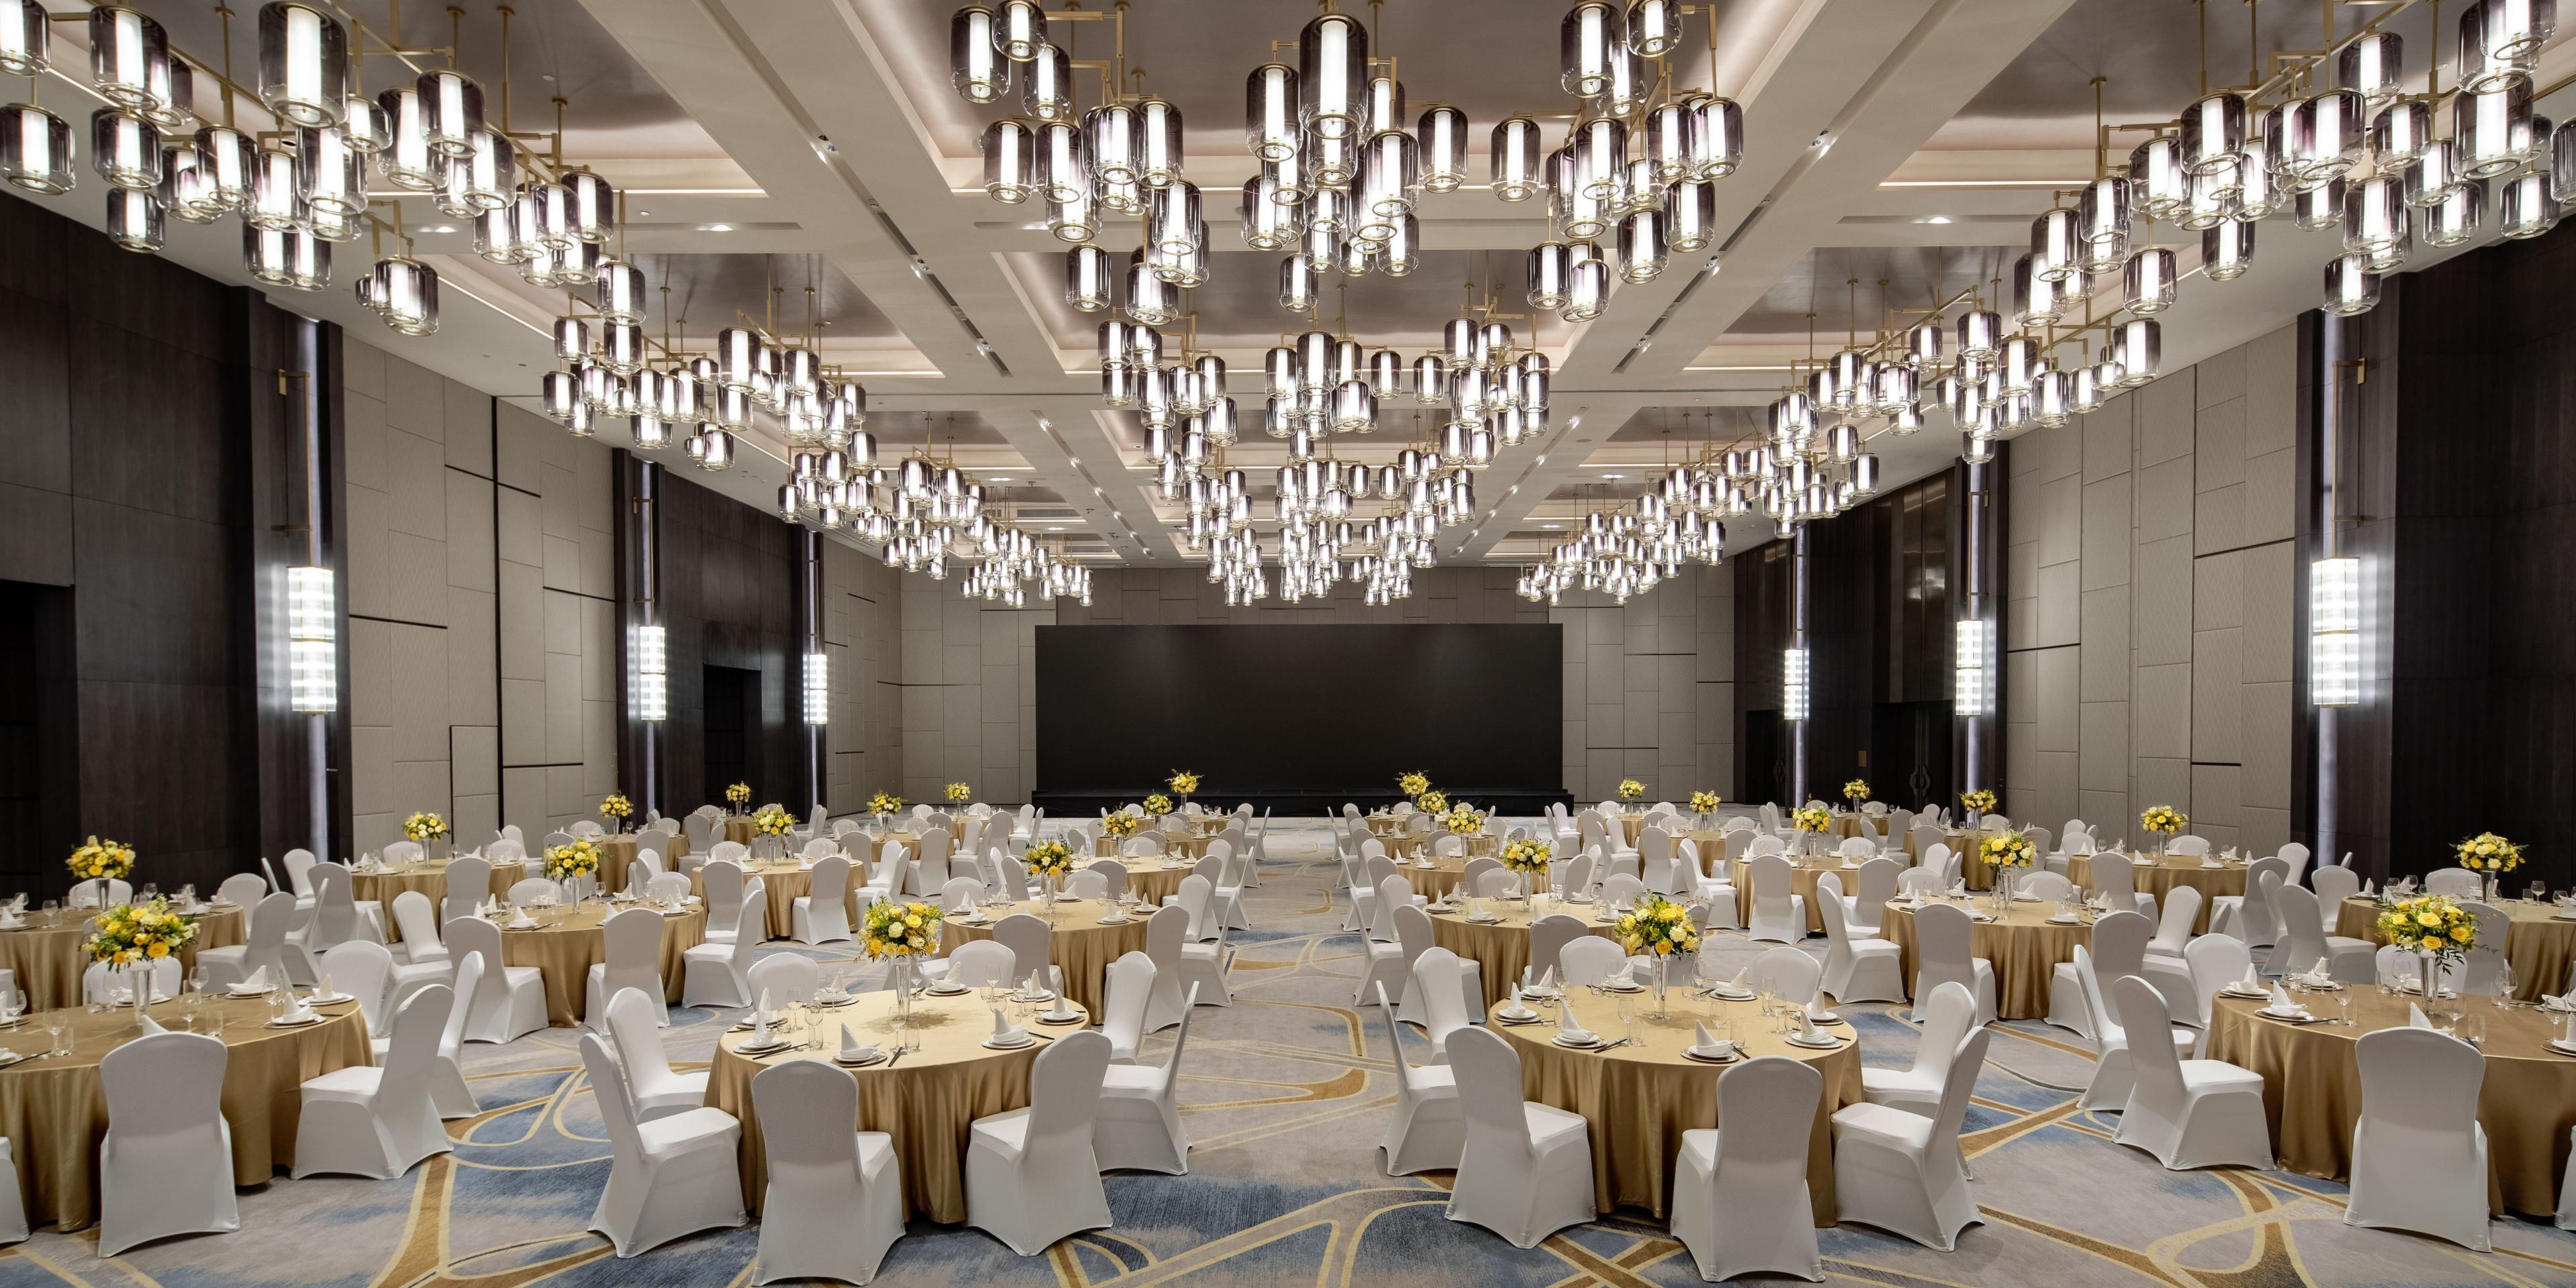 With more than 3,000m² of event and conference space, the New City Grand Ballroom is 1,000 m² and the 400m² Dongping Ballroom are available for guests' choice. Lifts and escalators are connecting the other 11 multi-function rooms in different sizes located on the 1st to the 4th floor, providing easy access.